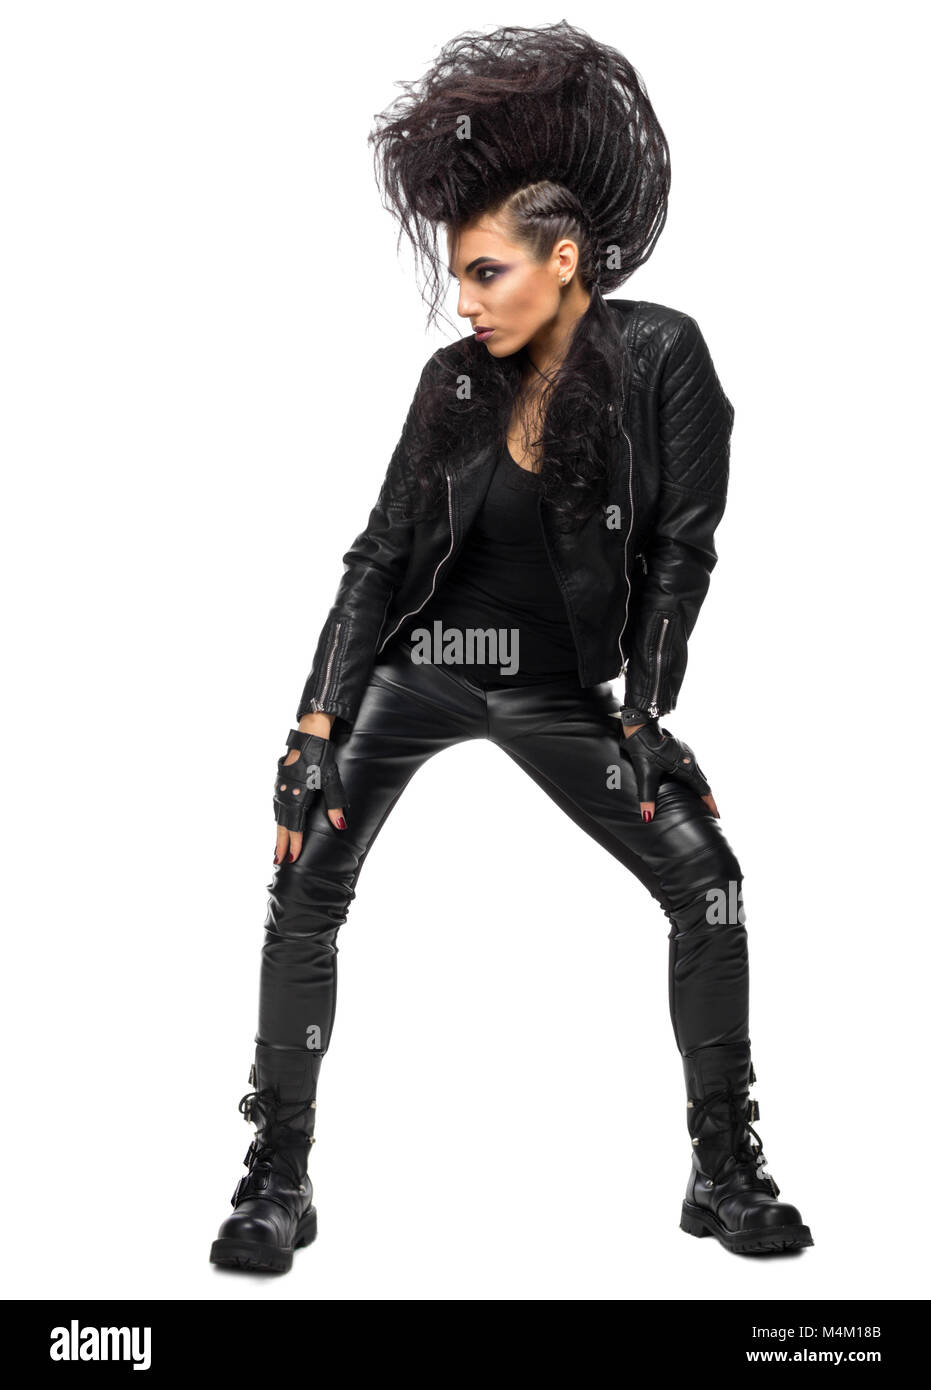 Young woman rock star isolated Stock Photo